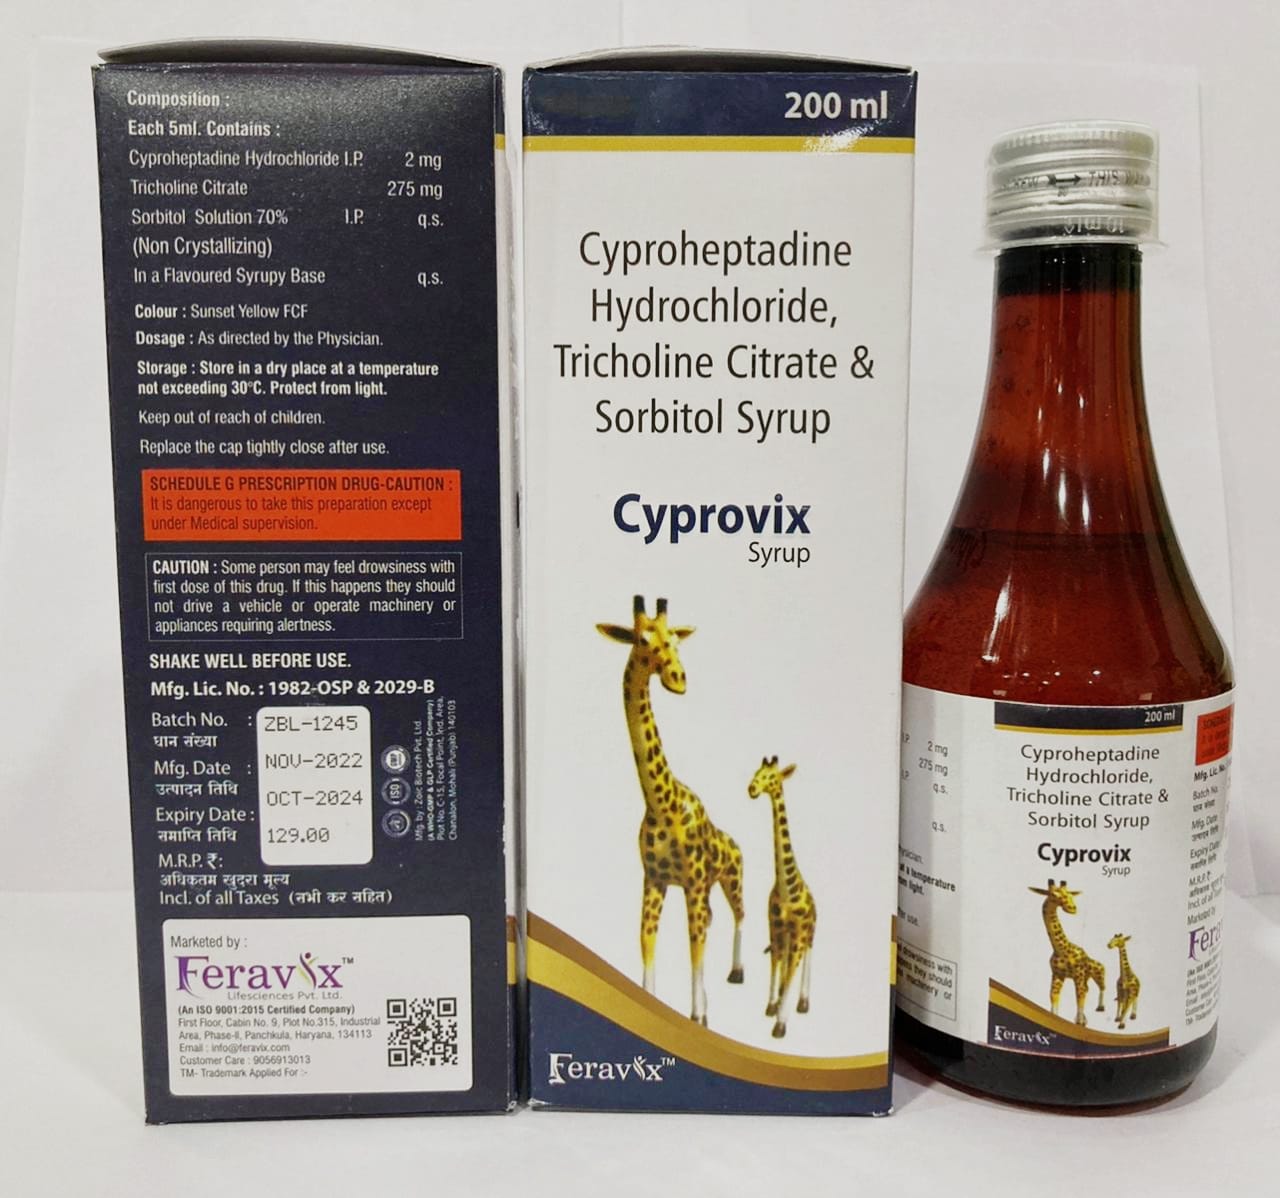 Product Name: CYPROVIX Syrup, Compositions of CYPROVIX Syrup are CYPROHEPTADINE 2 MG, TRICOLINE CITRATE 275 MG (SURBITOL BASE)  - Feravix Lifesciences